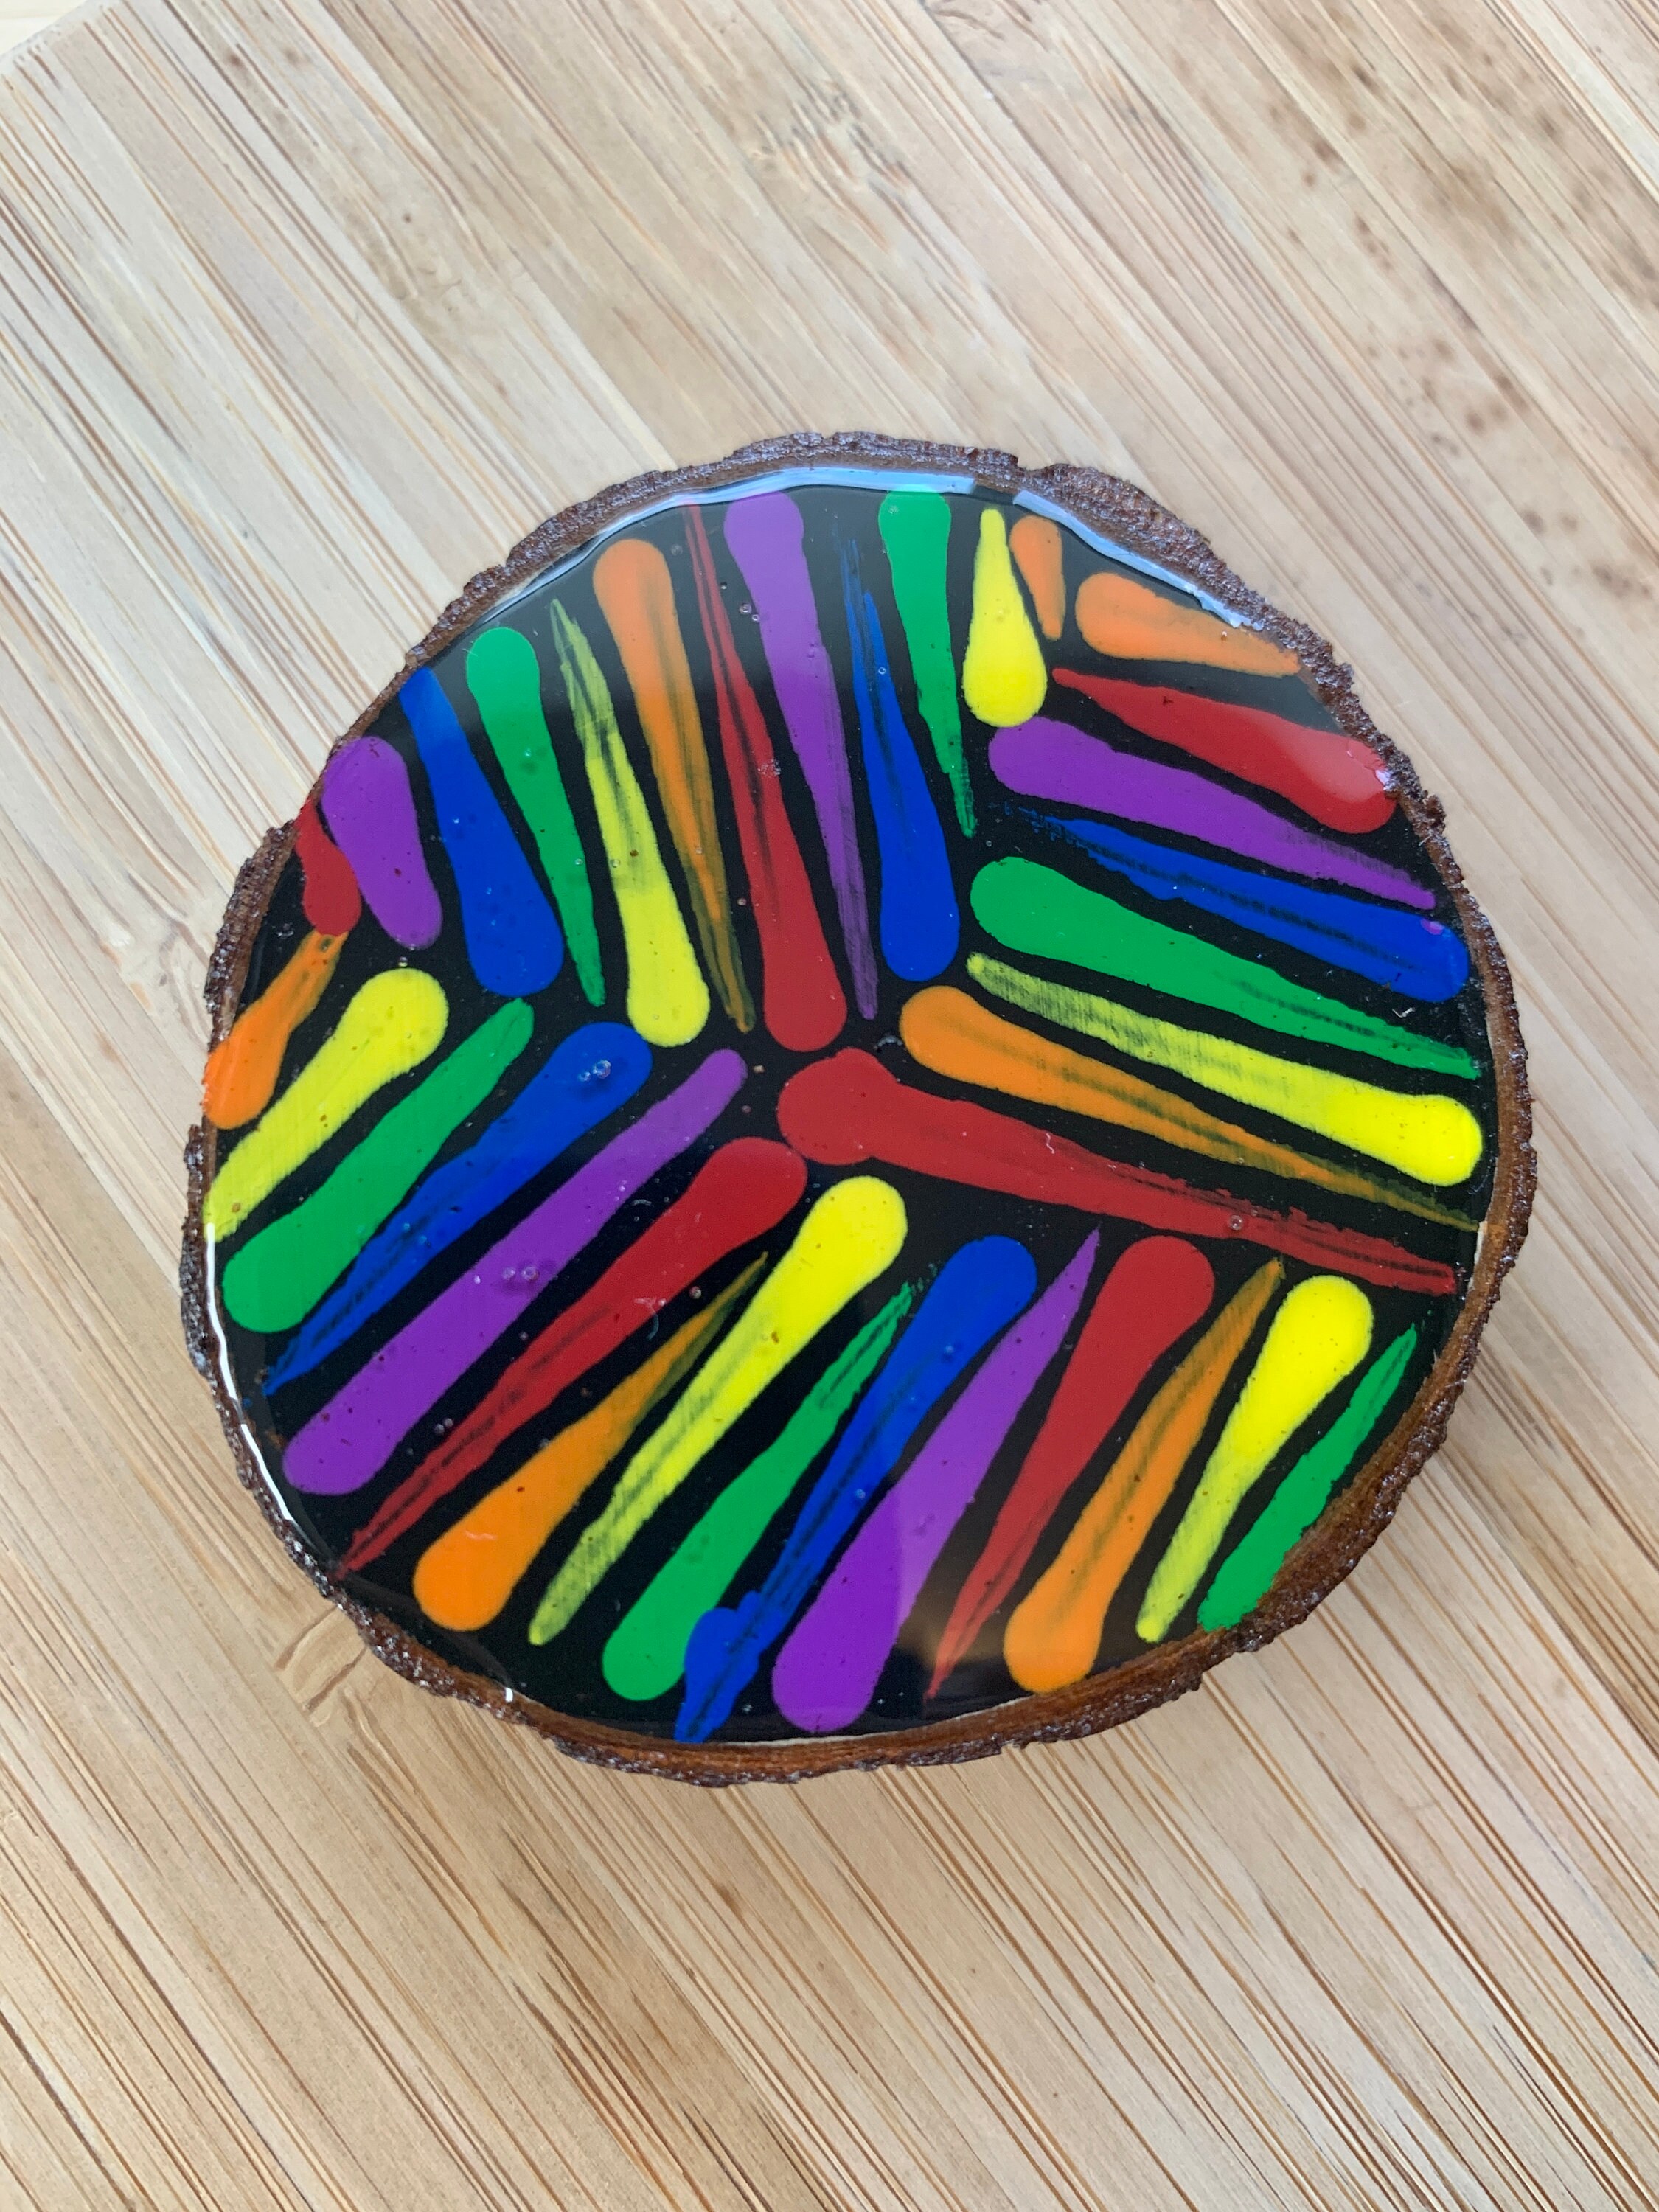 CRAZY STRONG Wooden Circle Magnets, Painted White Modern Style,  Refrigerator Magnets, Home or Office Magnetic Board Organizer, 1.5 Diameter  